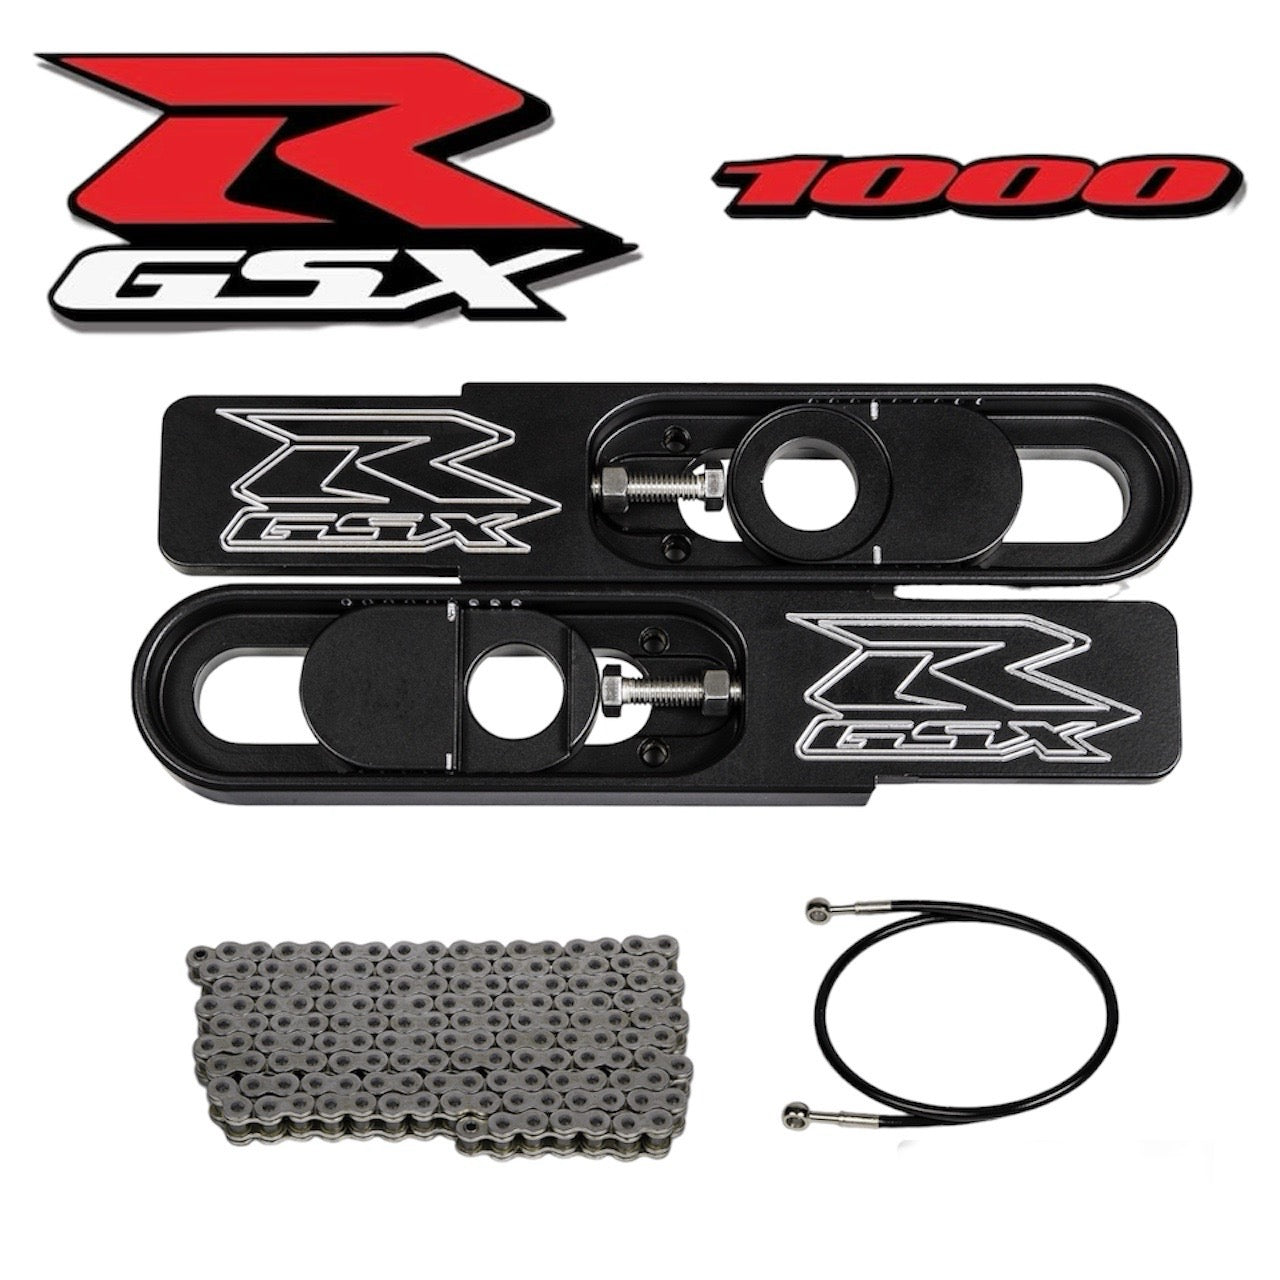 GSXR 1000 4 1/2 to 9" Swingarm Extensions